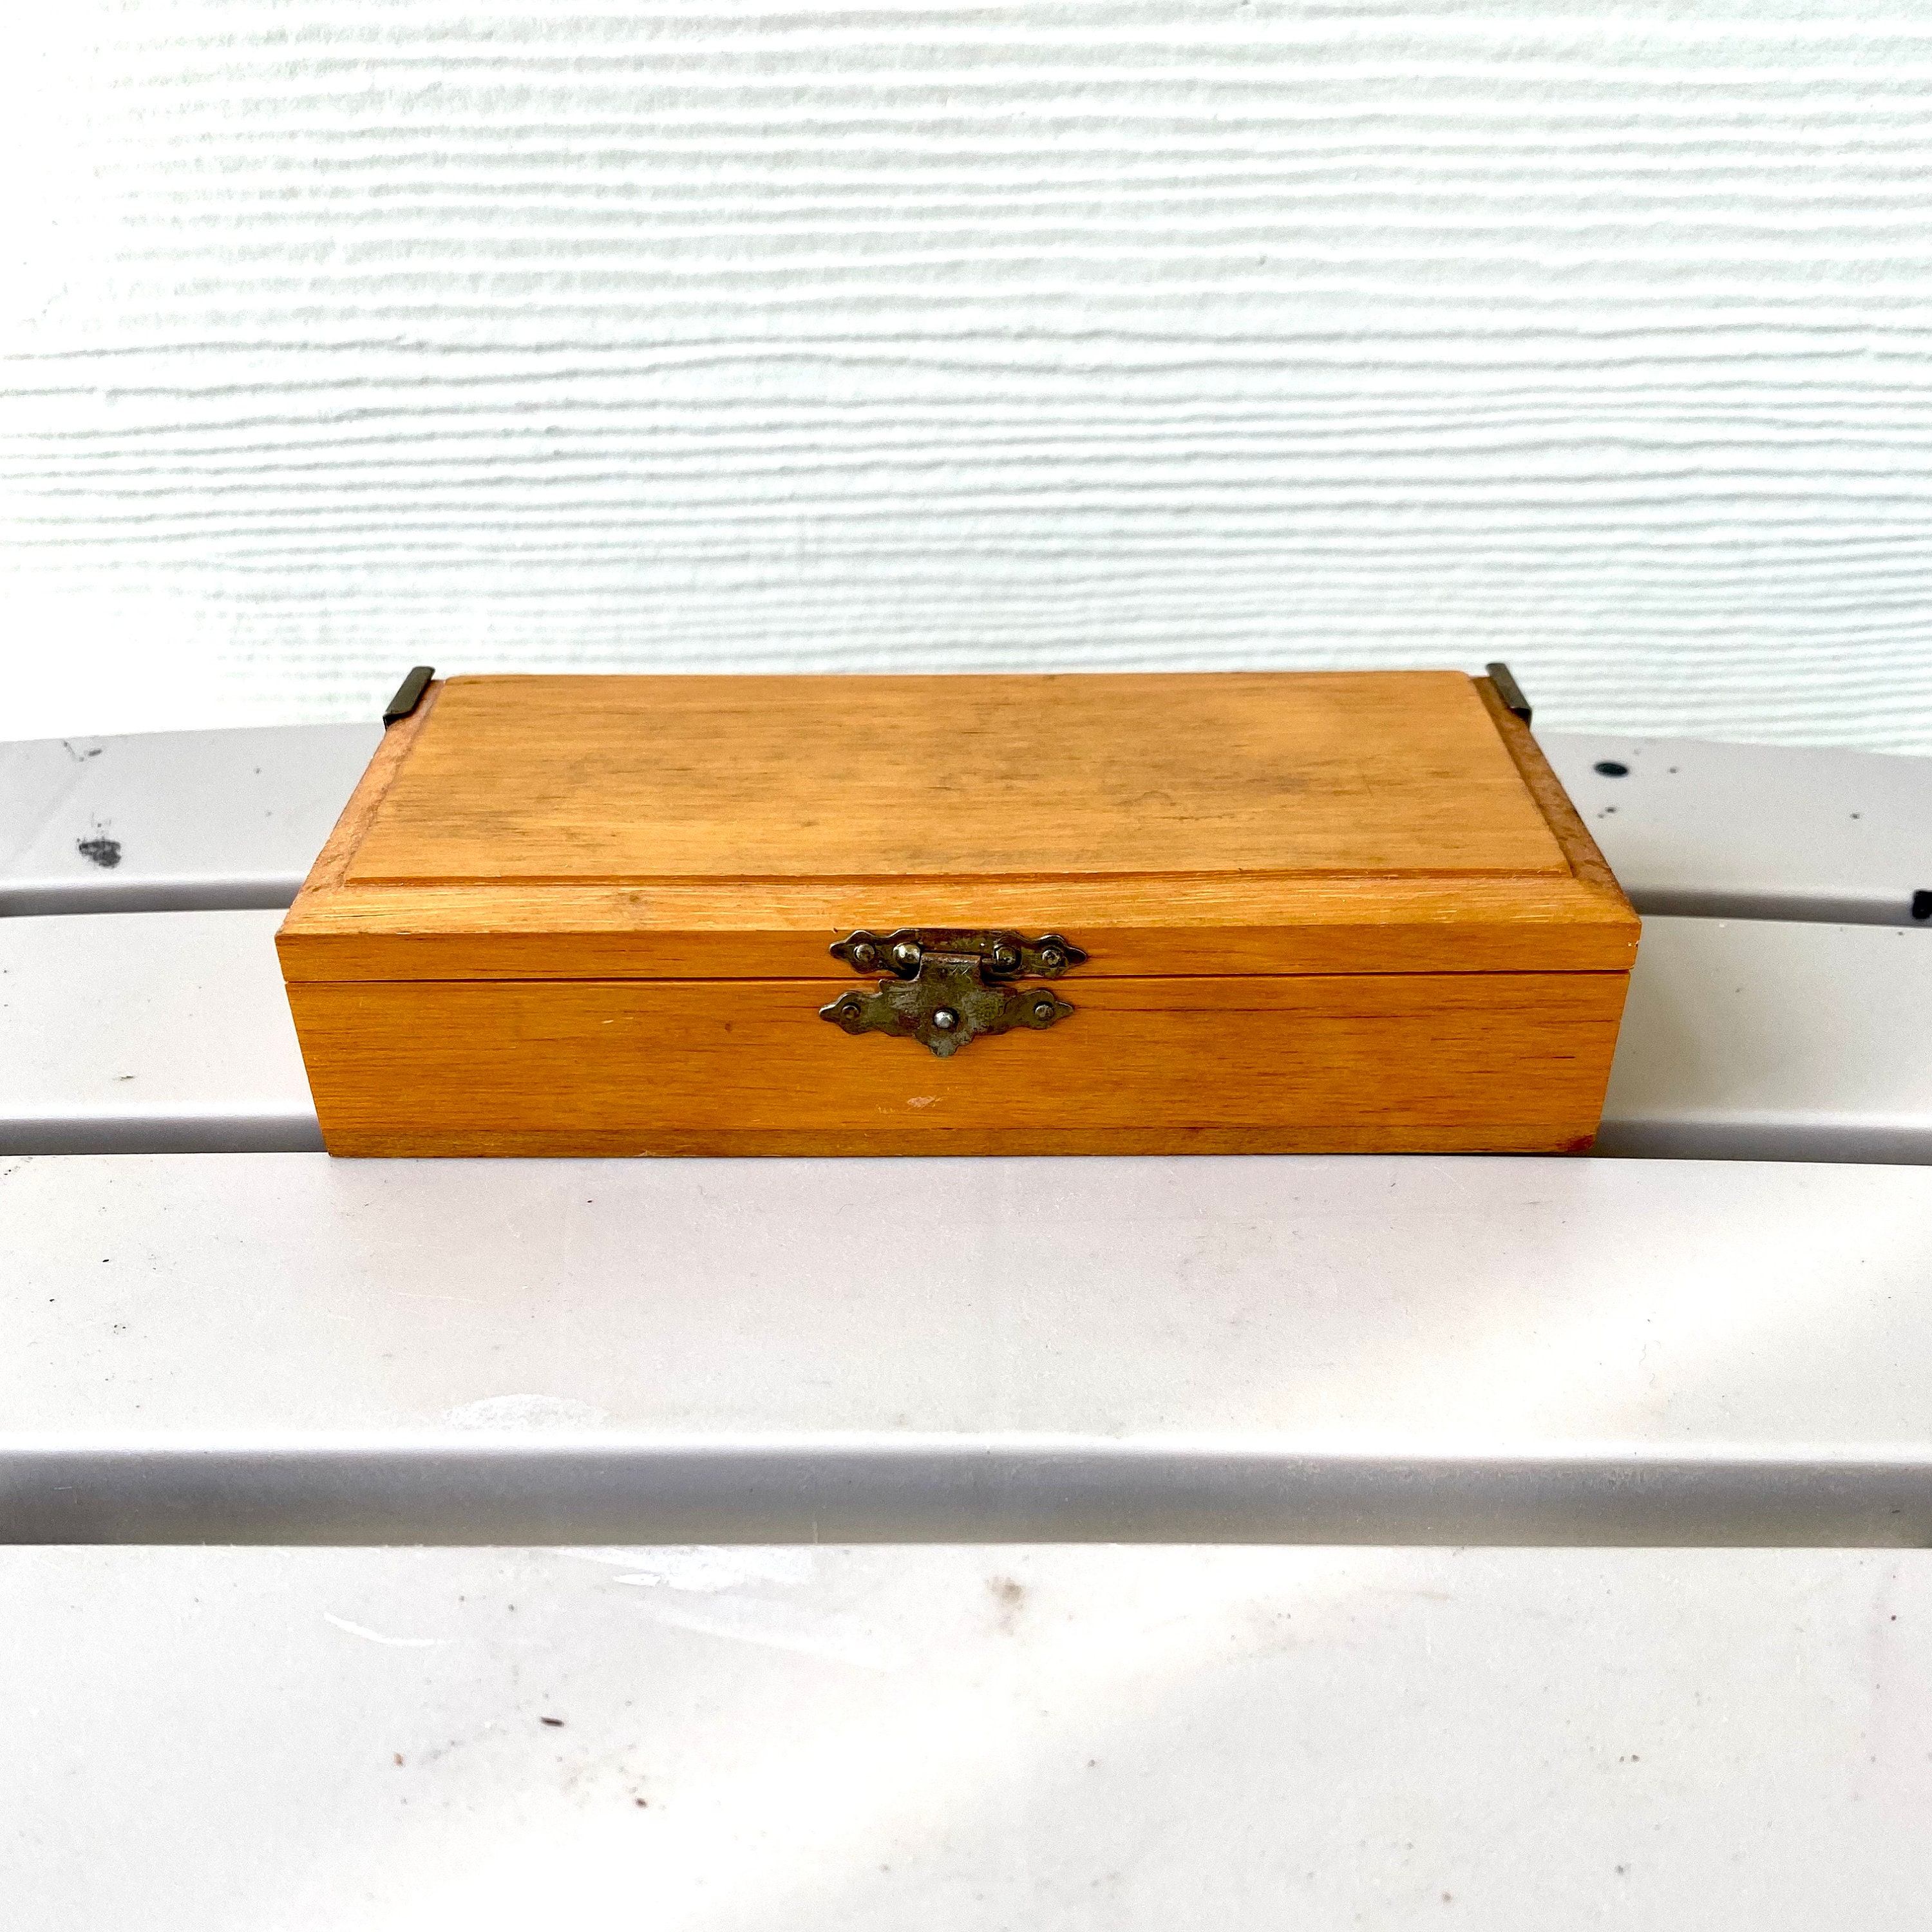 Woodline Works Box with Hinged Lid